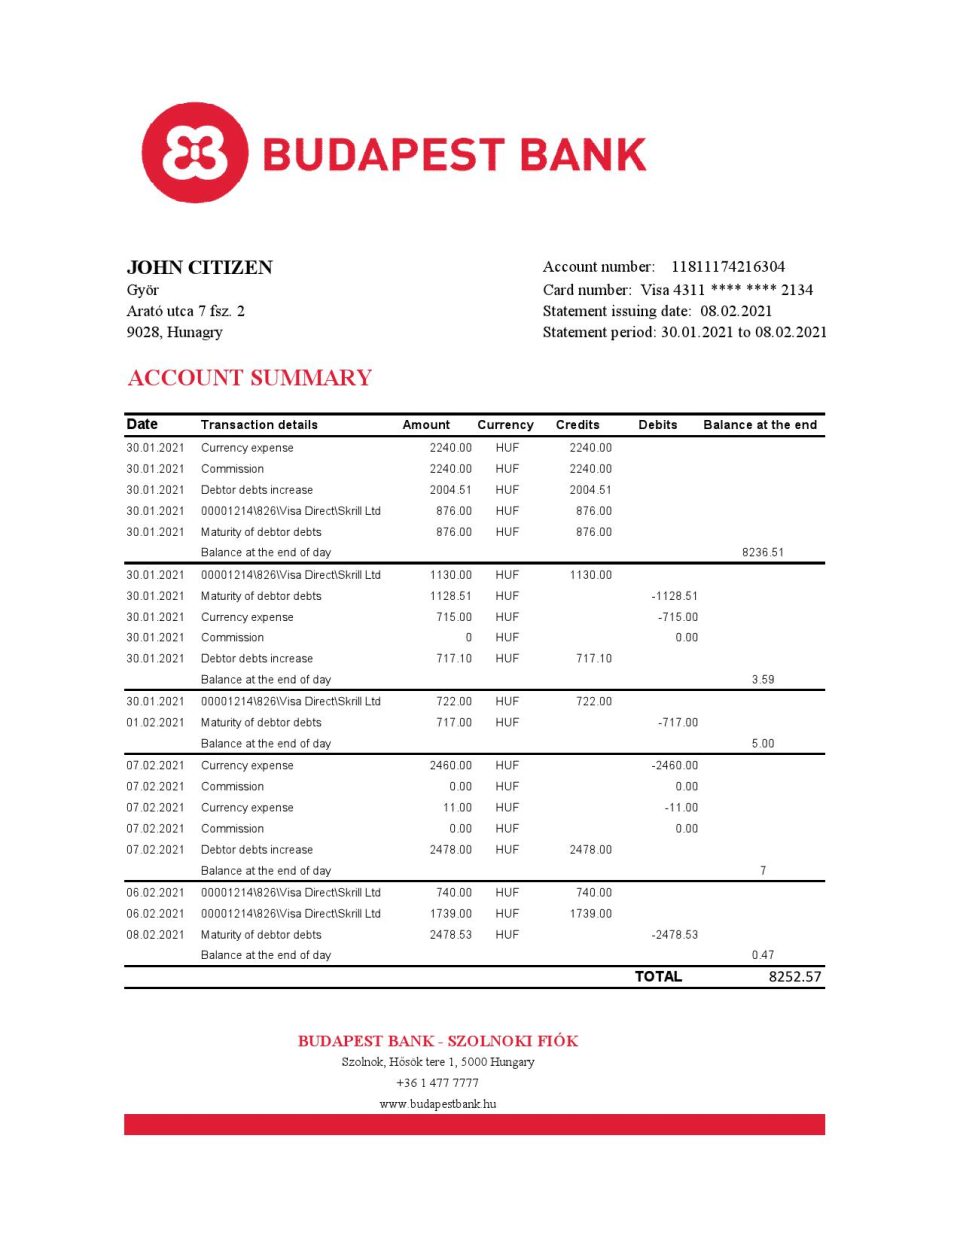 Hungary Budapest Bank – Szolnoki Fiók bank statement easy to fill template in .xls and .pdf file format